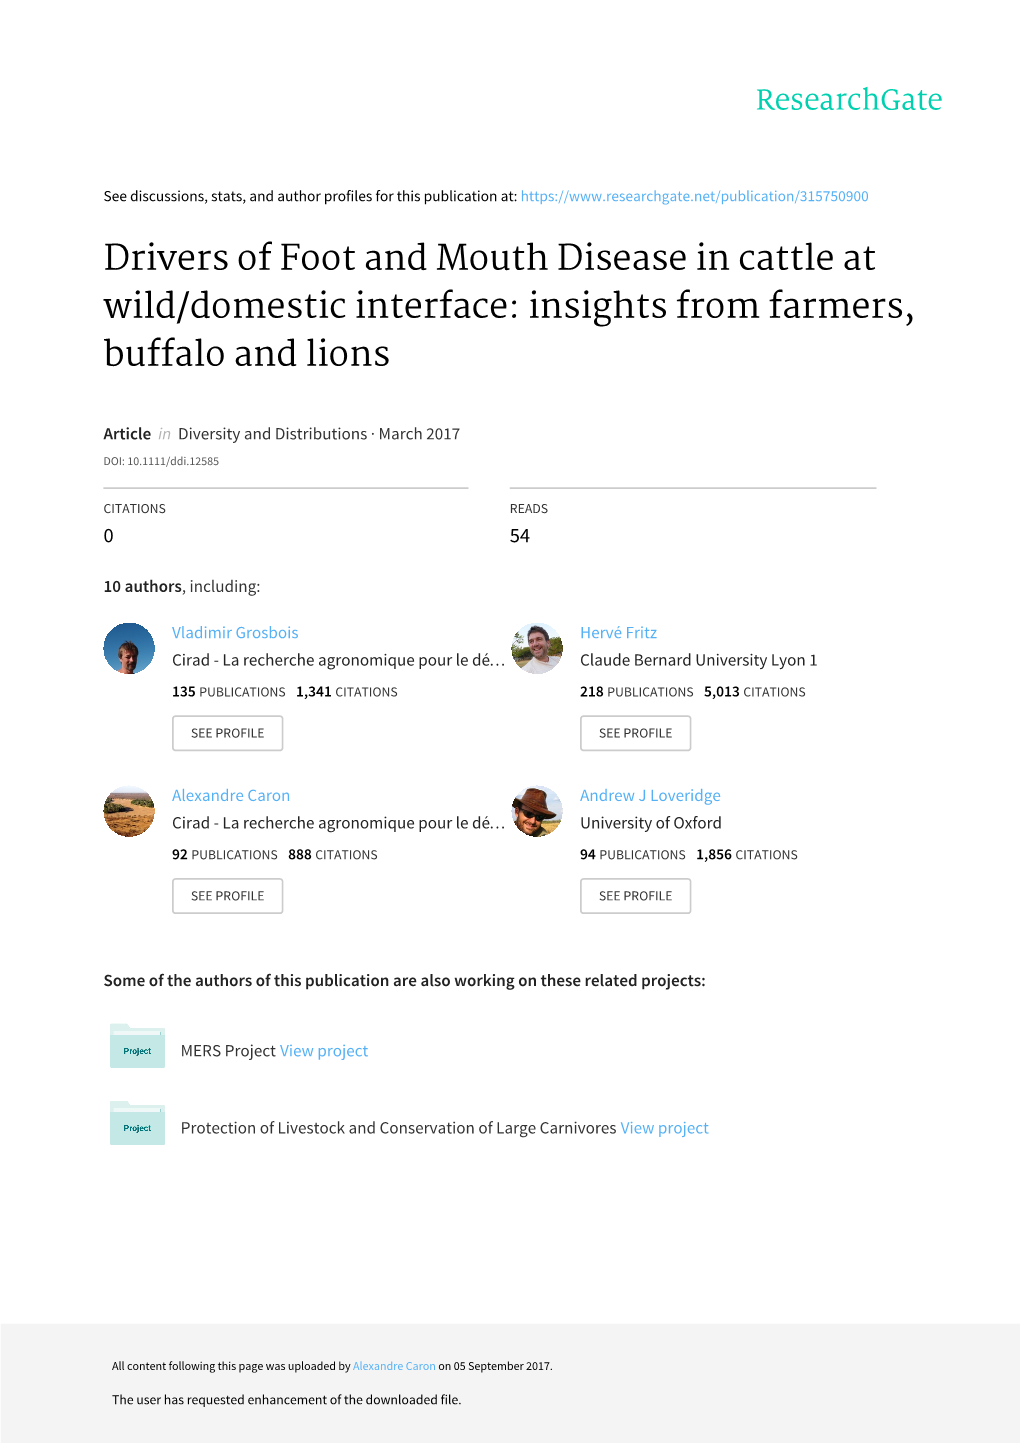 Drivers of Foot‐And‐Mouth Disease in Cattle at Wild/Domestic